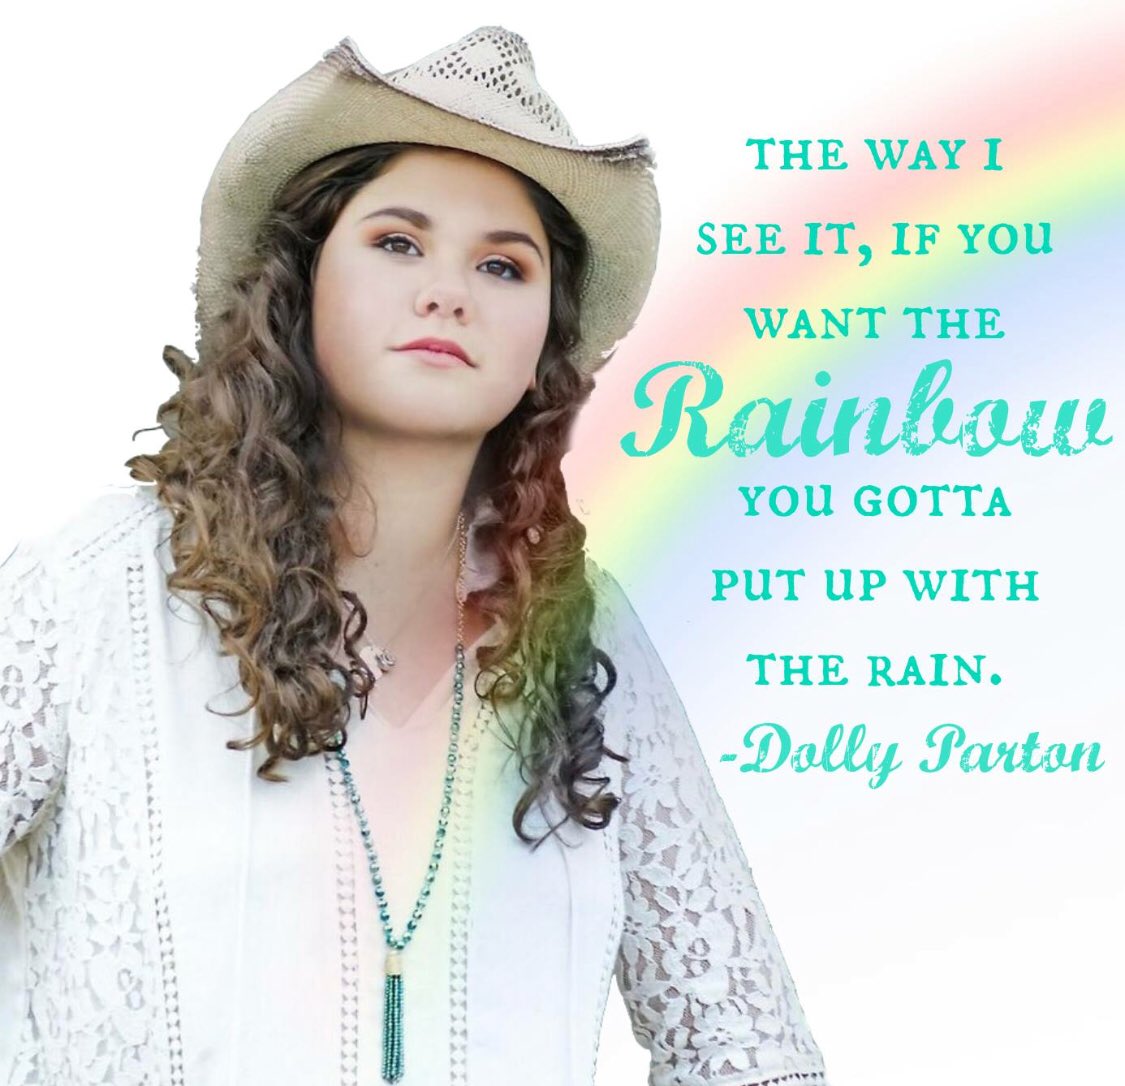 When in doubt, just ask yourself #WhatWouldDollyDo

#Rainbow